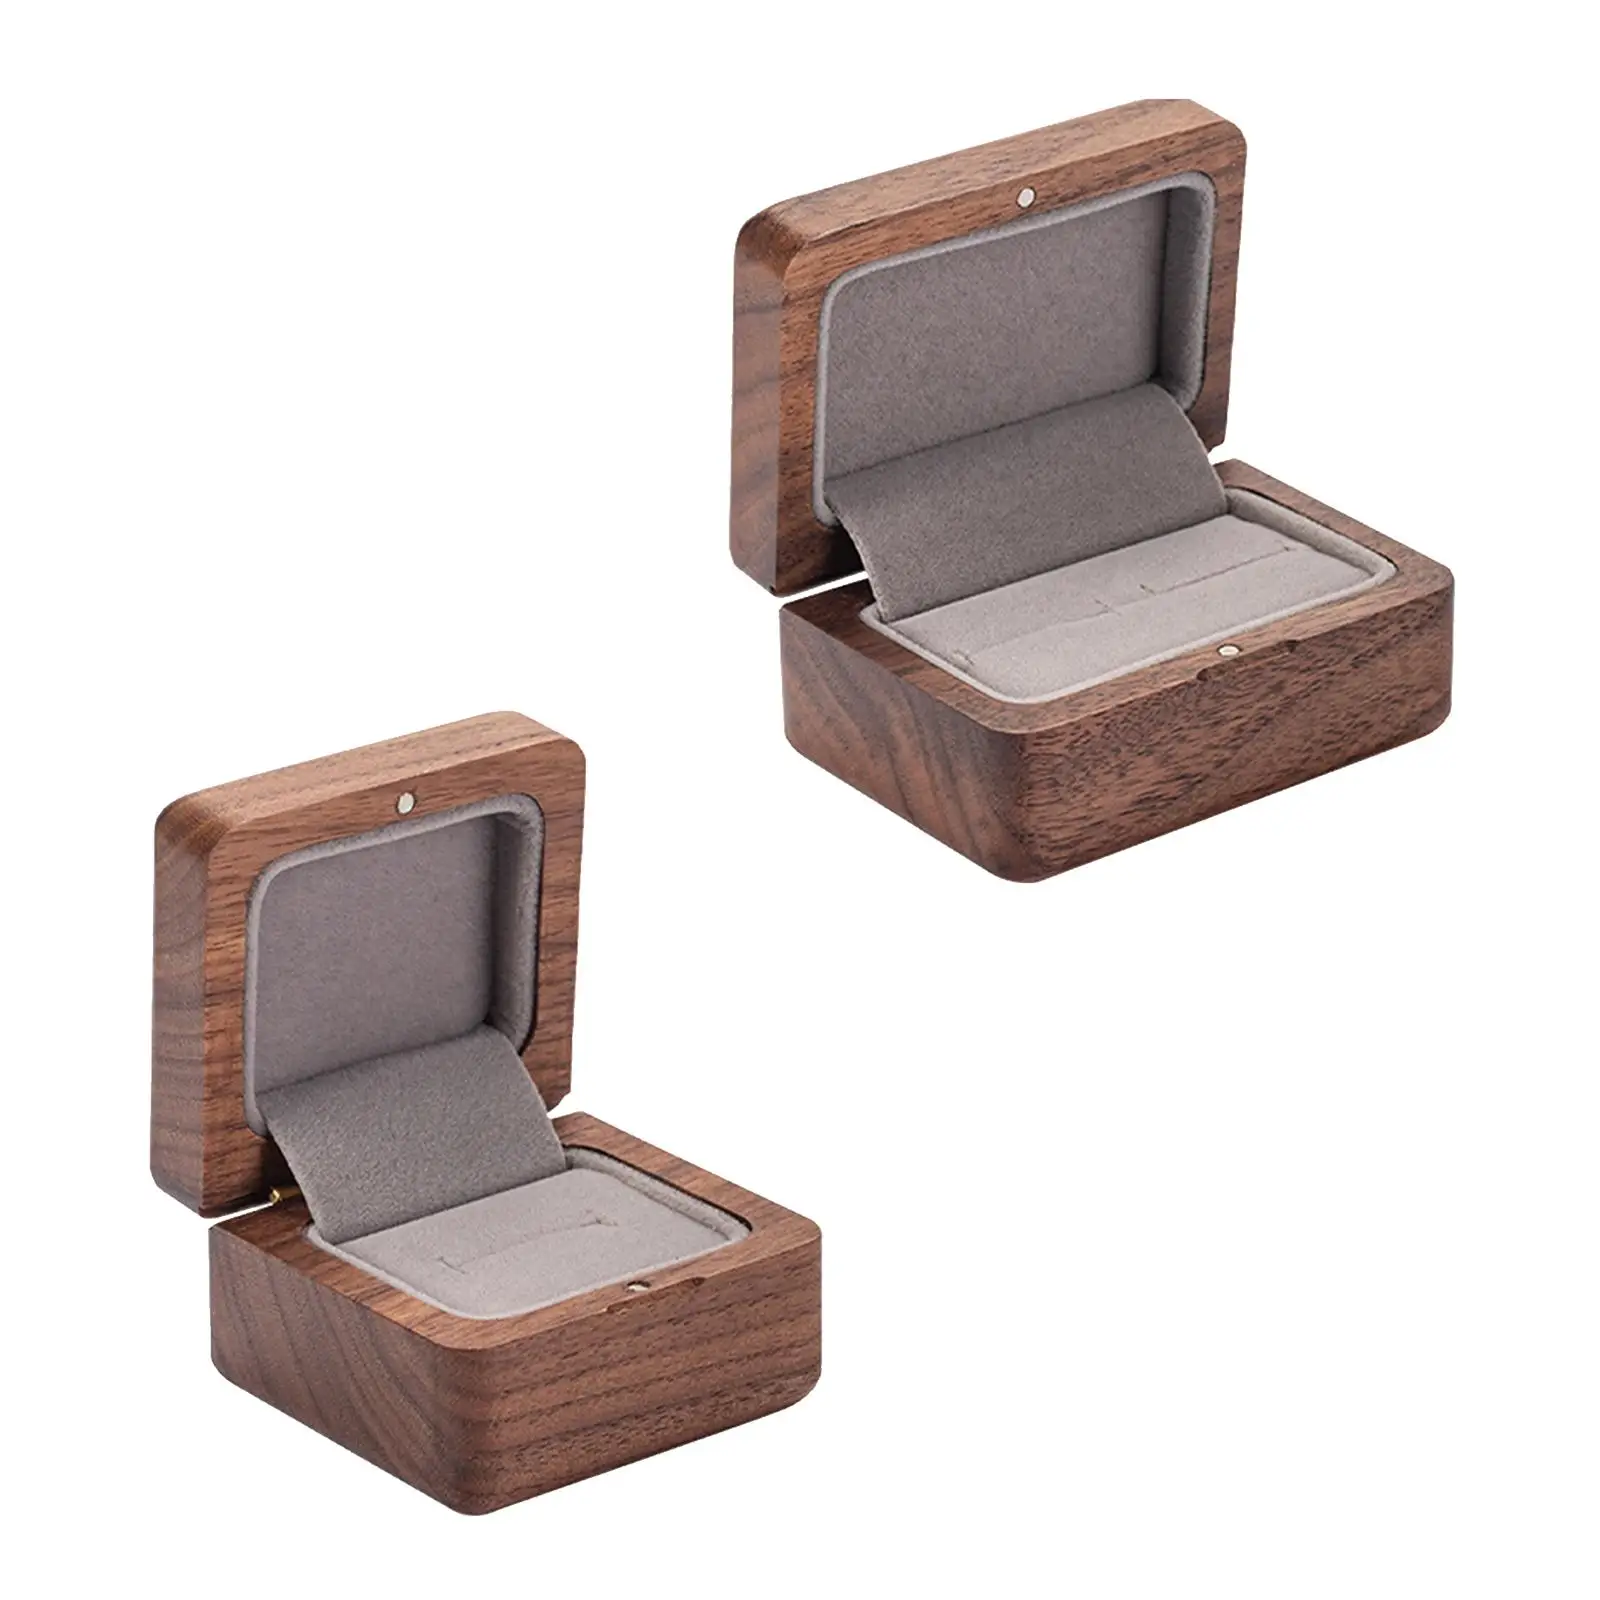 Wooden Ring Box Handmade Ring Holder Box for Ceremony Anniversary Proposal